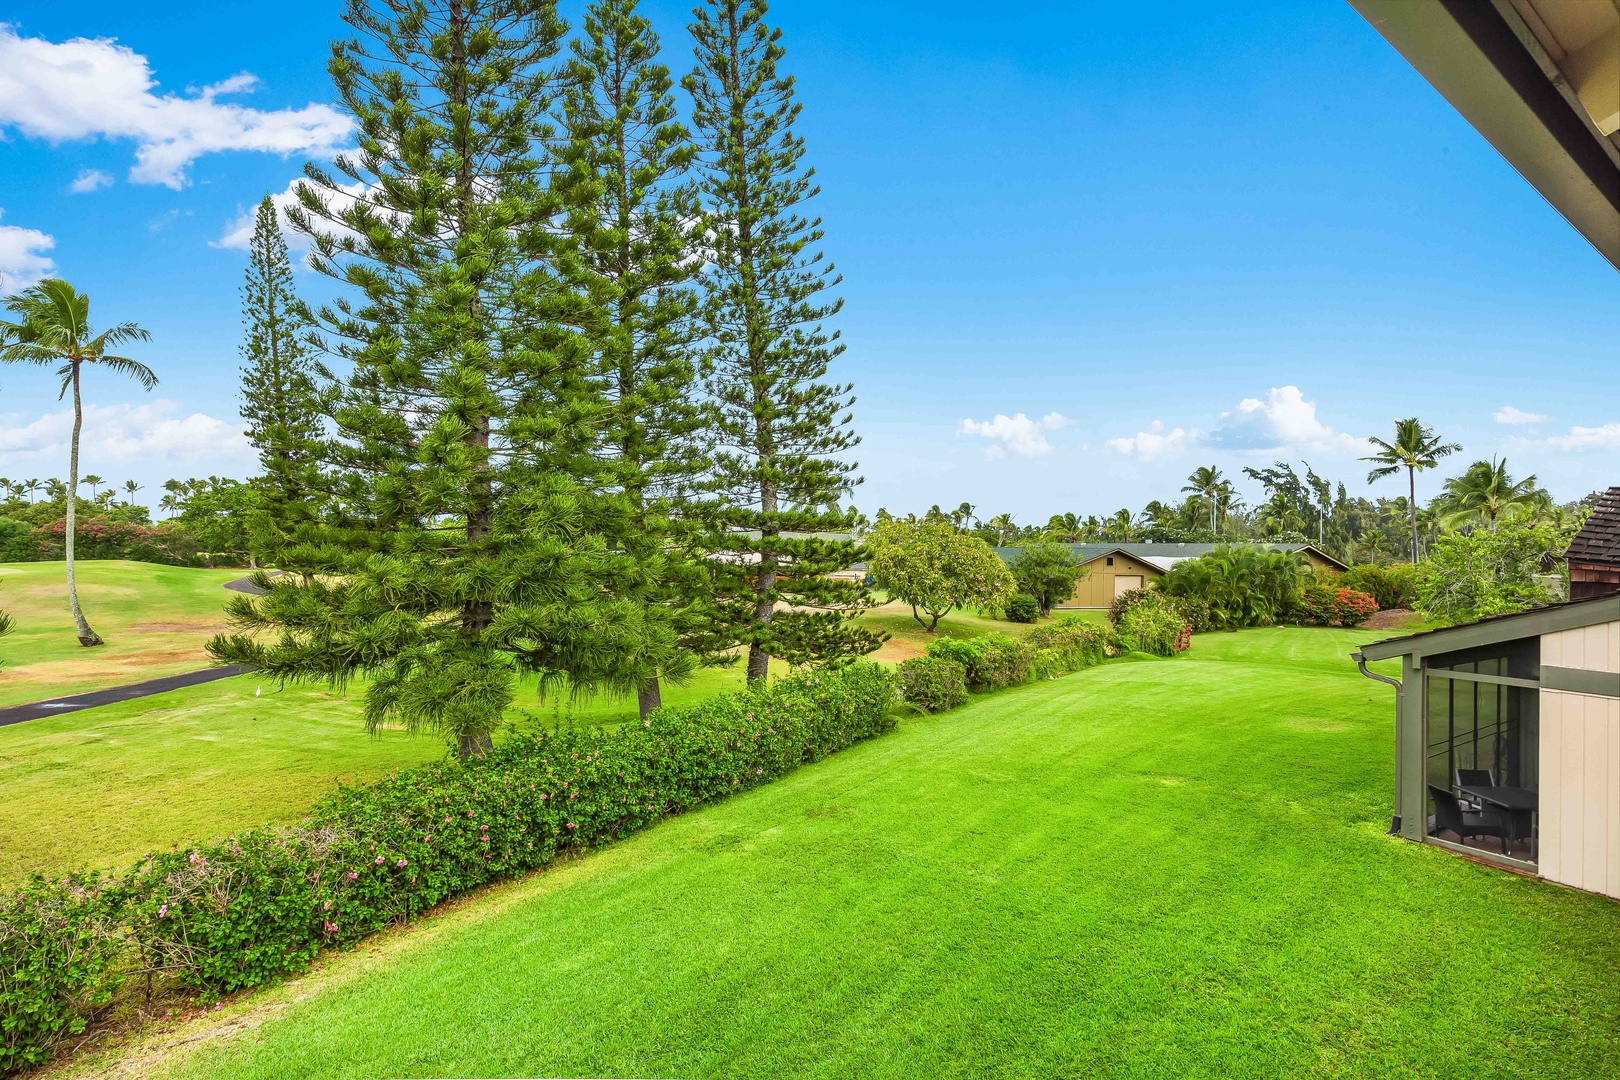 Kahuku Vacation Rentals, Ilima West Kuilima Estates #18 at Turtle Bay - Take in this beautiful view from your private lanai.